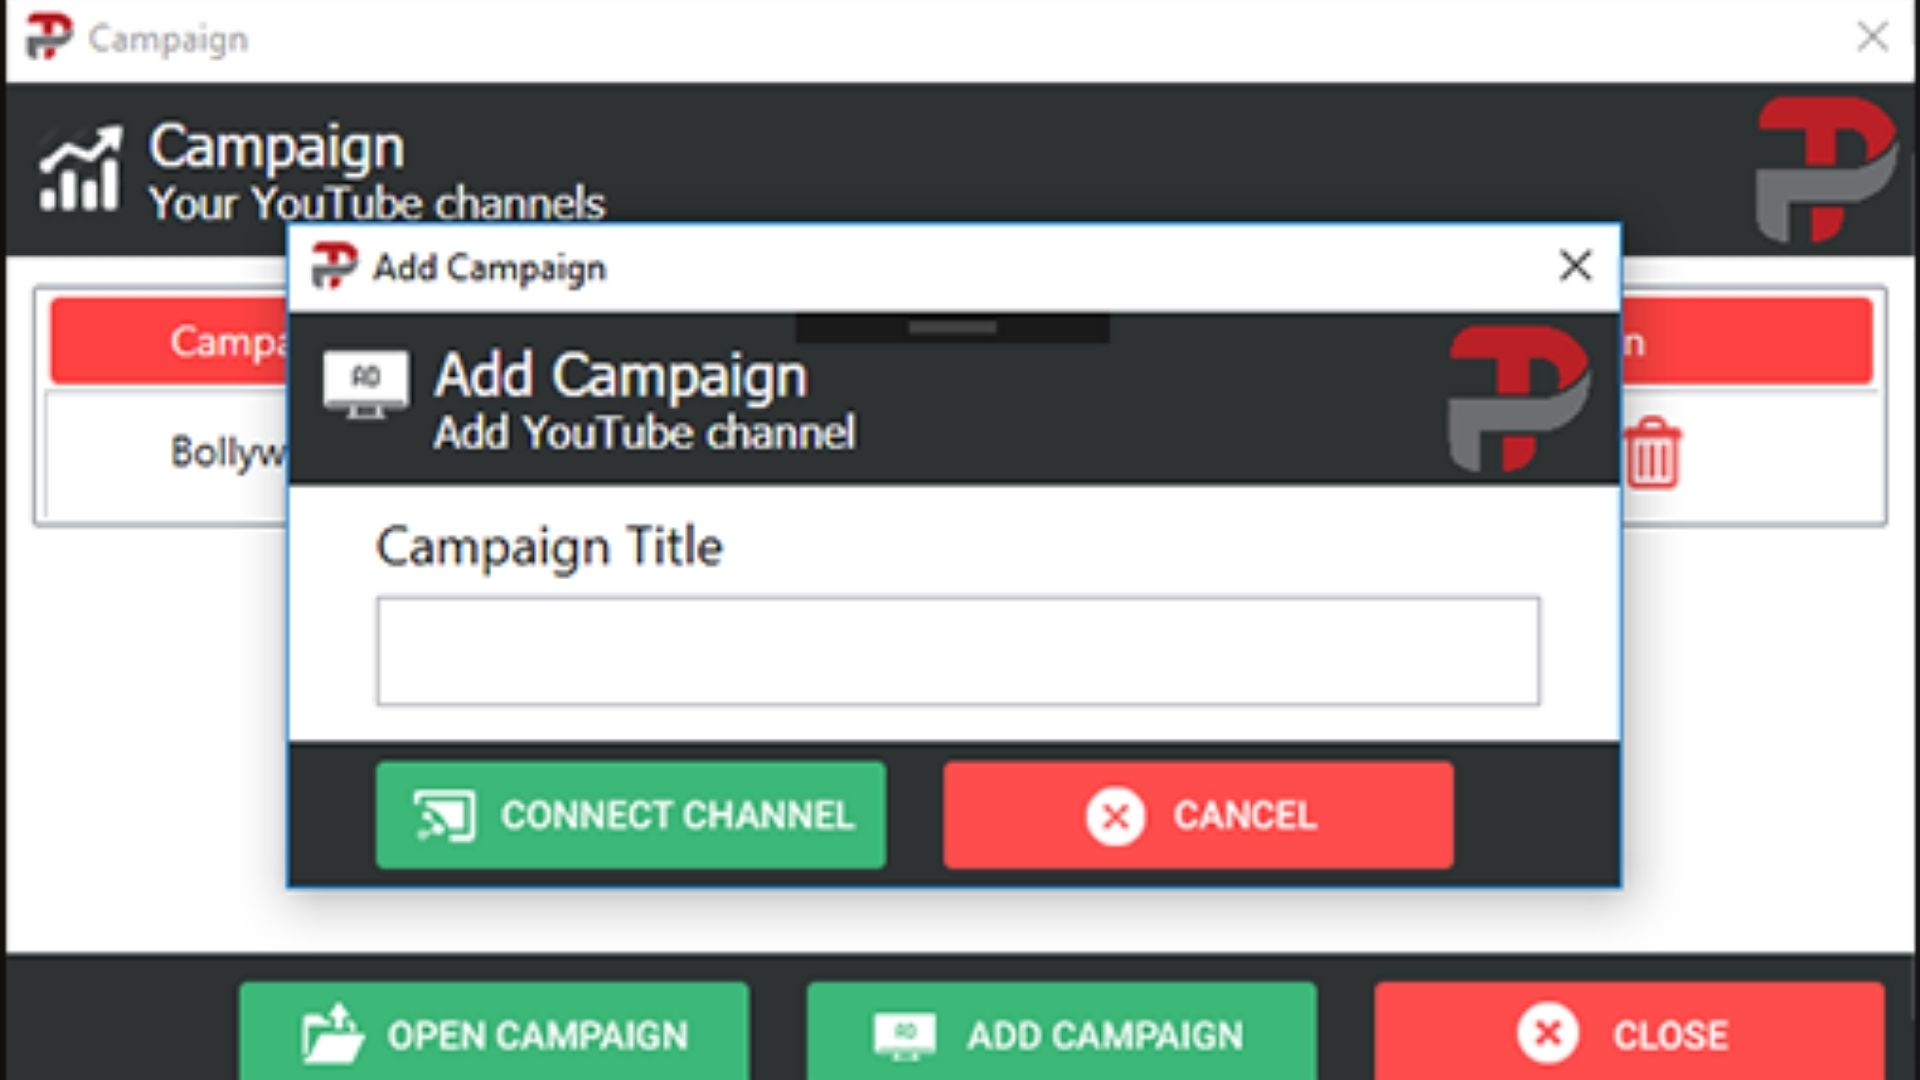 Create campaigns for each channel you want to promote.